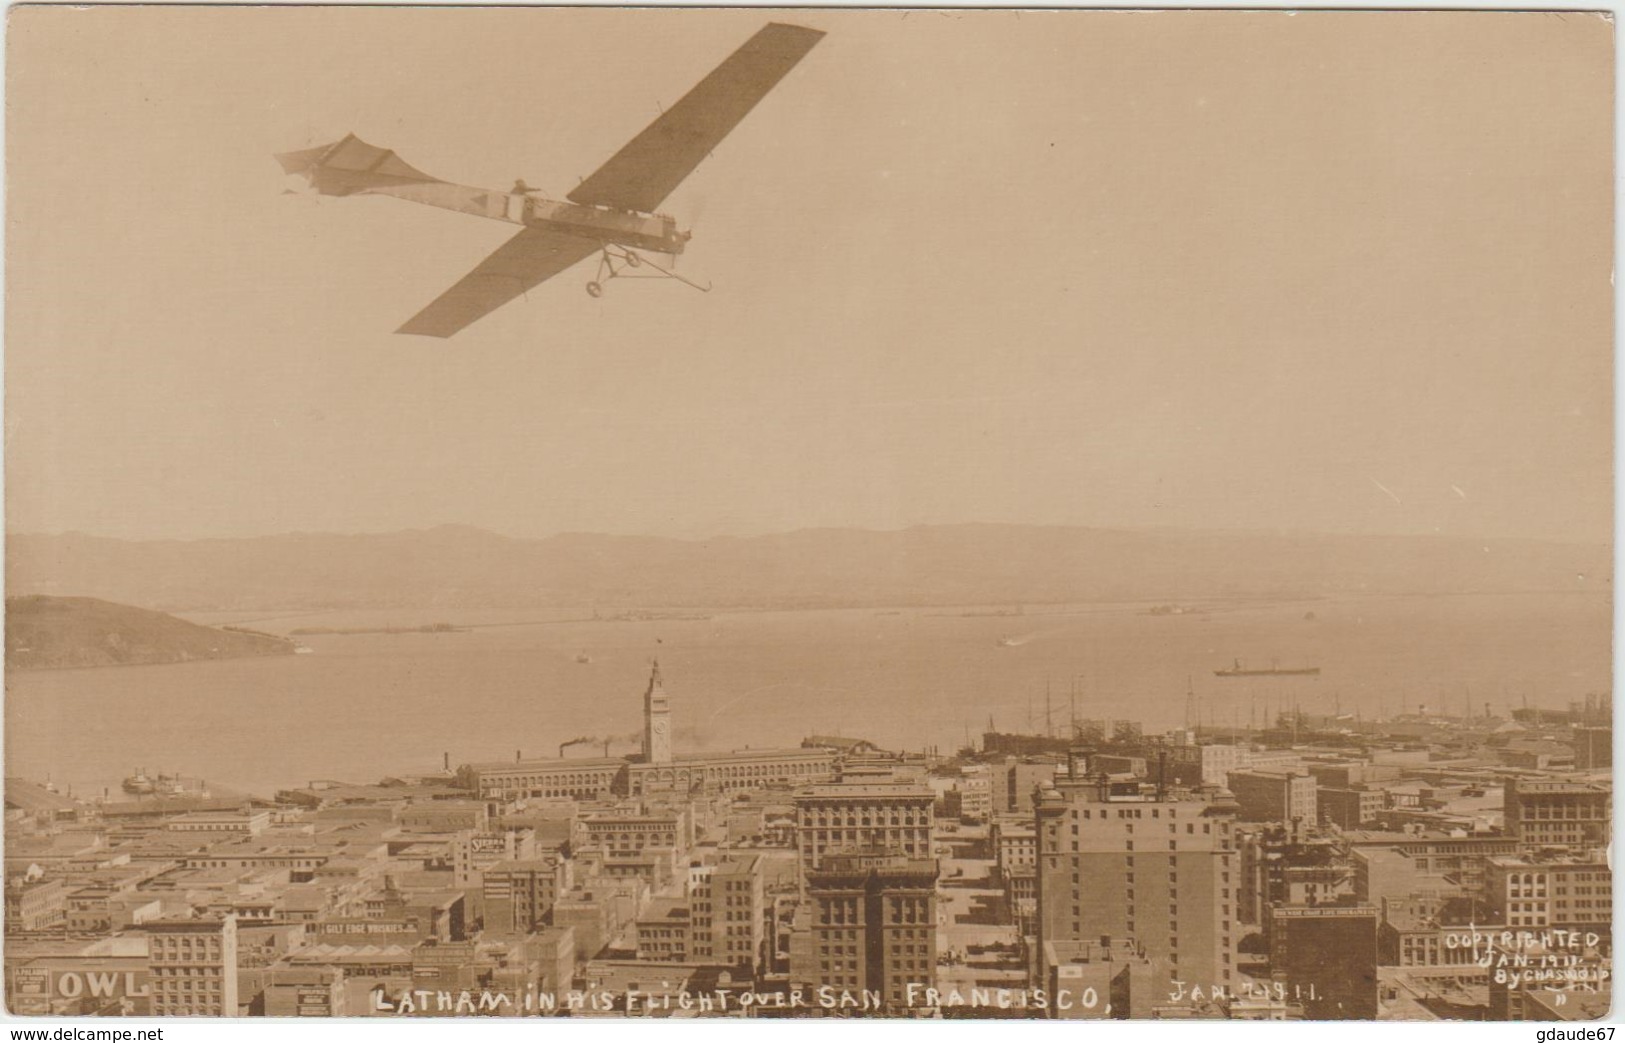 LATHAN IN HIS FLIGHT OVER SAN FRANCISCO - Airmen, Fliers